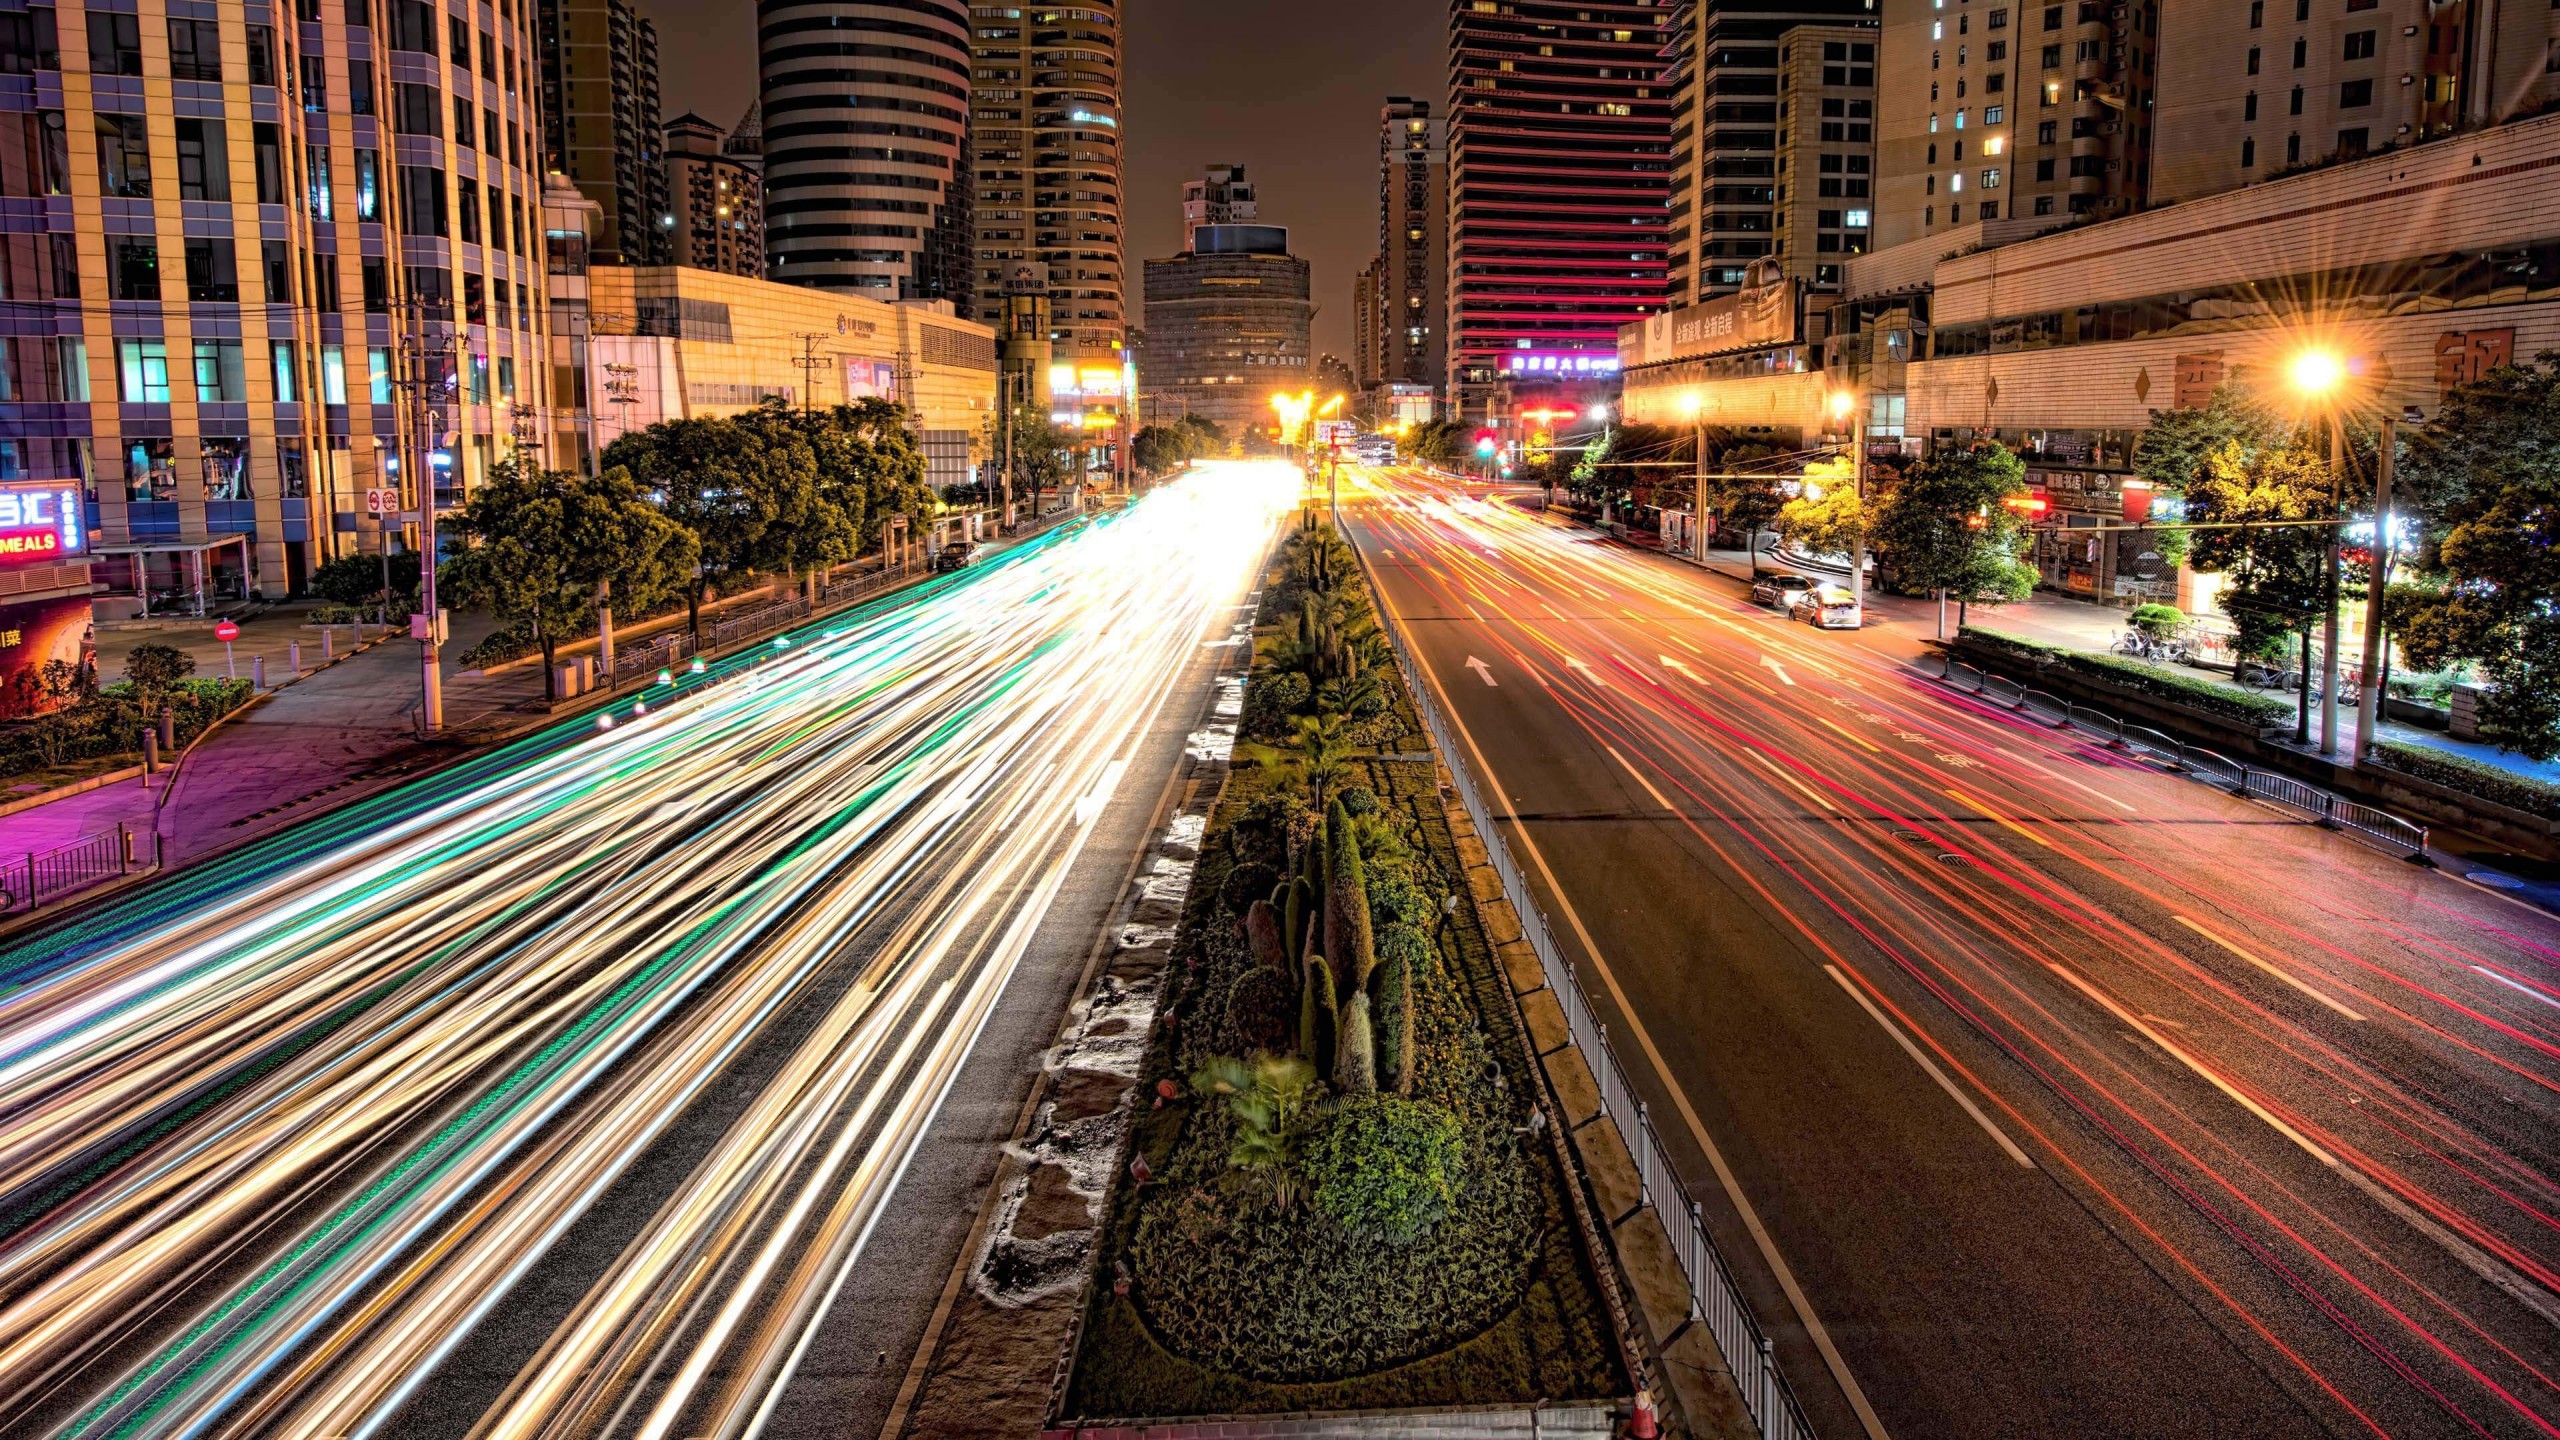 Busy Road in Shanghai at Night Wallpaper for Social Media YouTube Channel Art